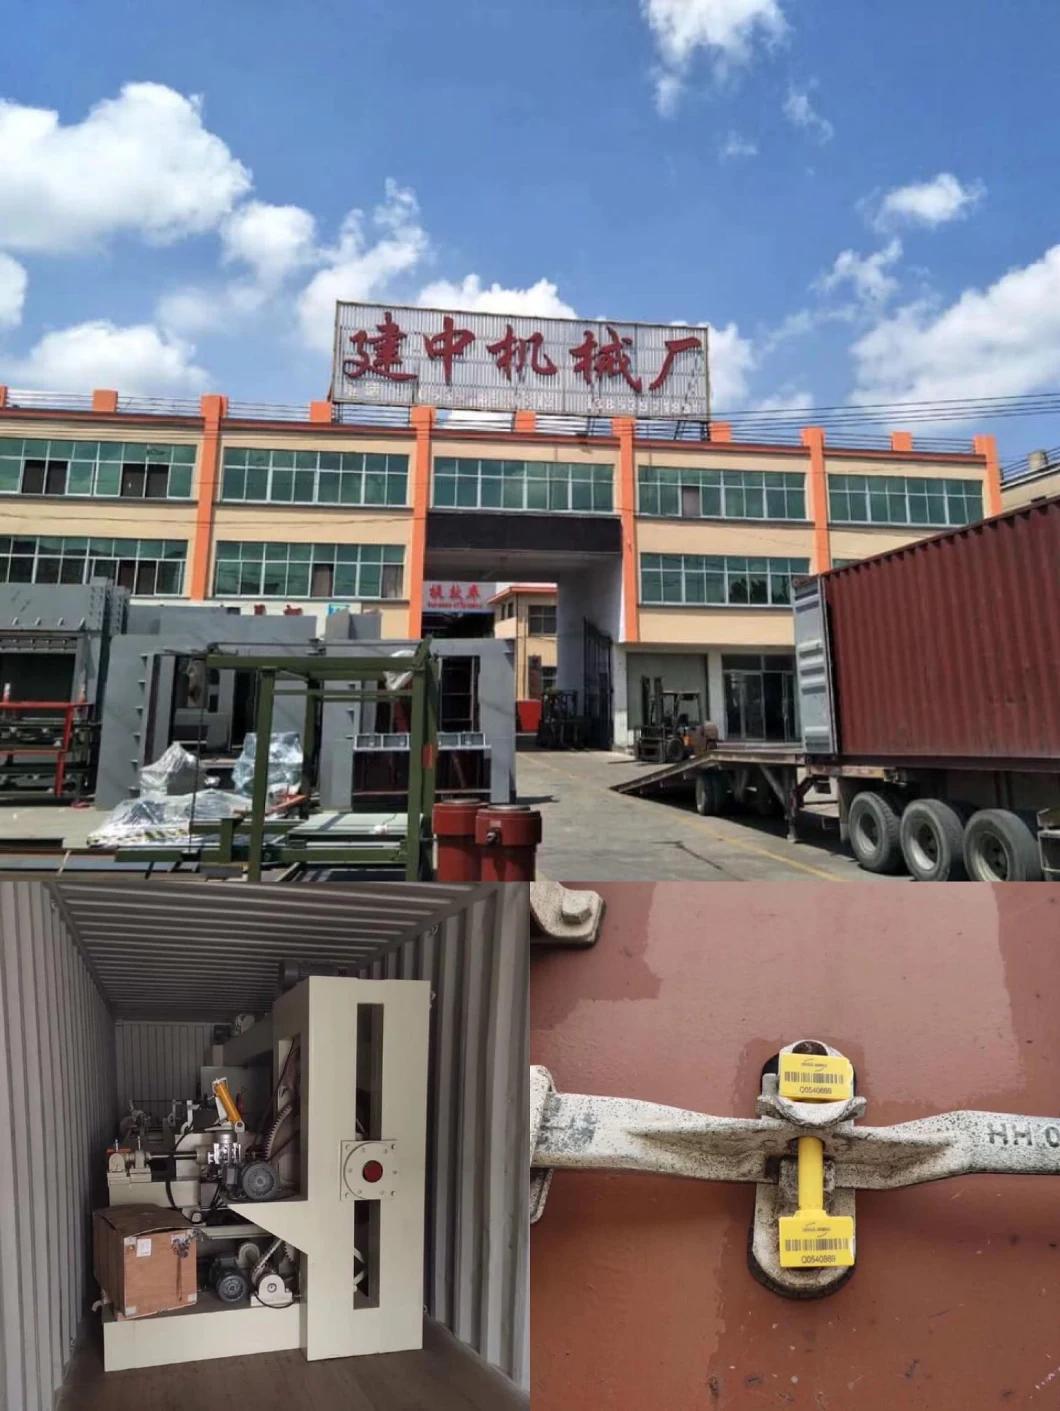 Veneer Sawing Cutting Machinery/Plywood Making Machinery/Trustworthy Plywood Machine/Cutting Machhinery for Plywood Making